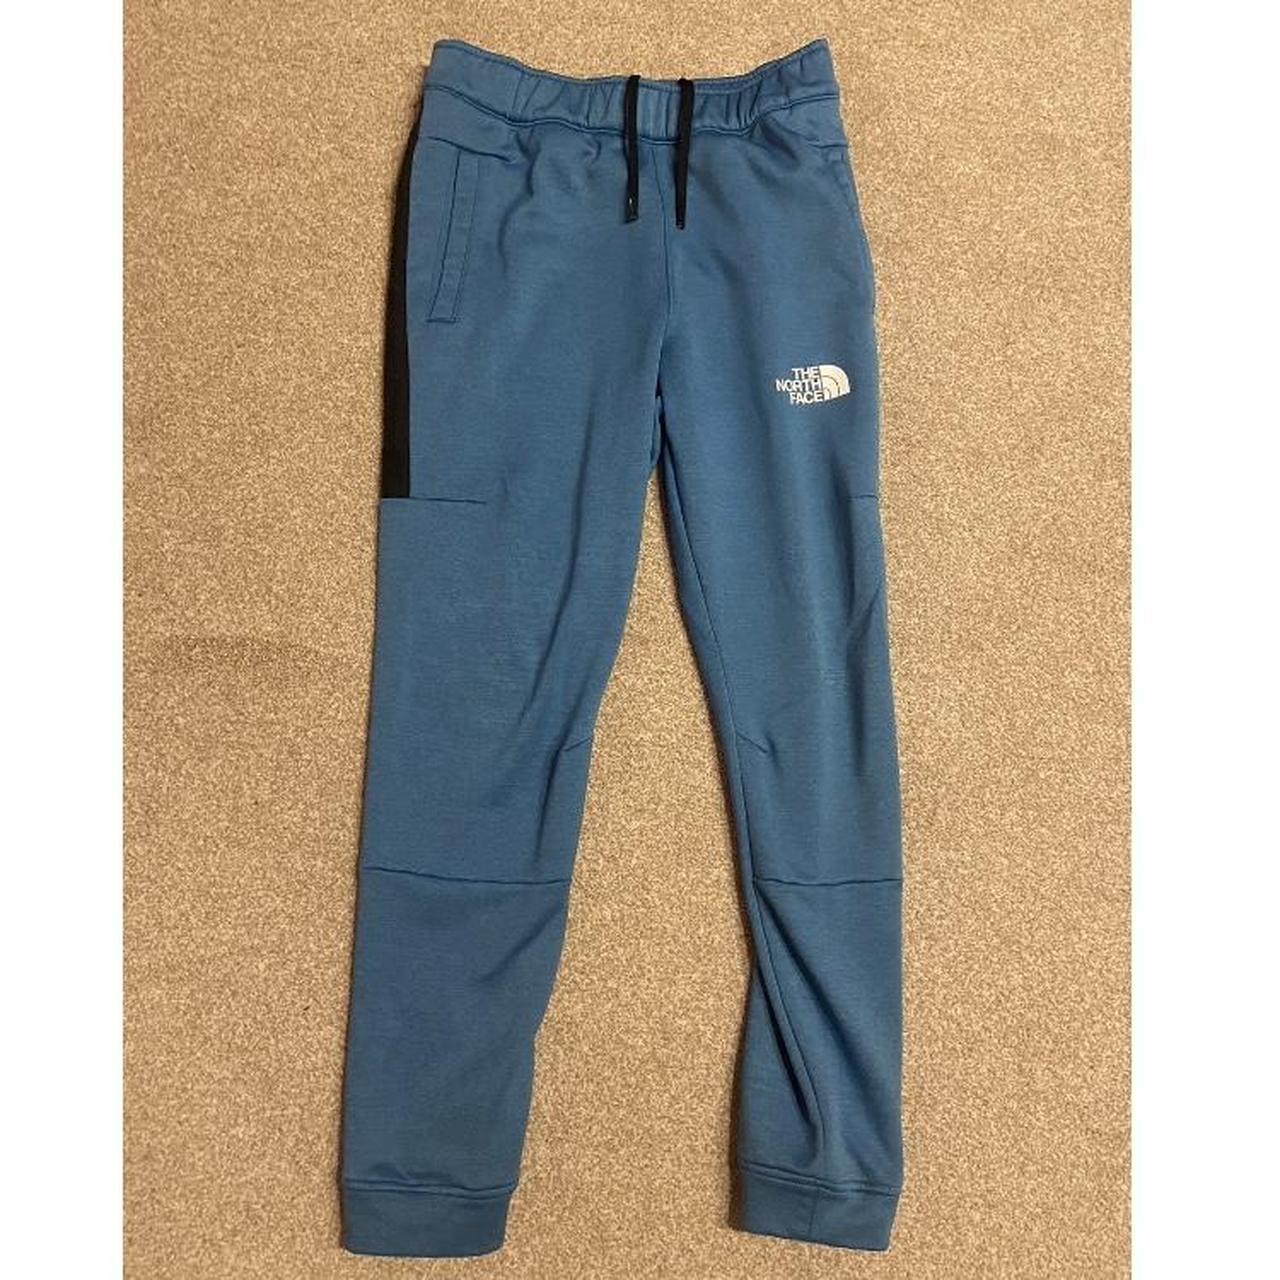 THE NORTH FACE MA FLEECE PANTS (SIZE MENS SMALL)... - Depop